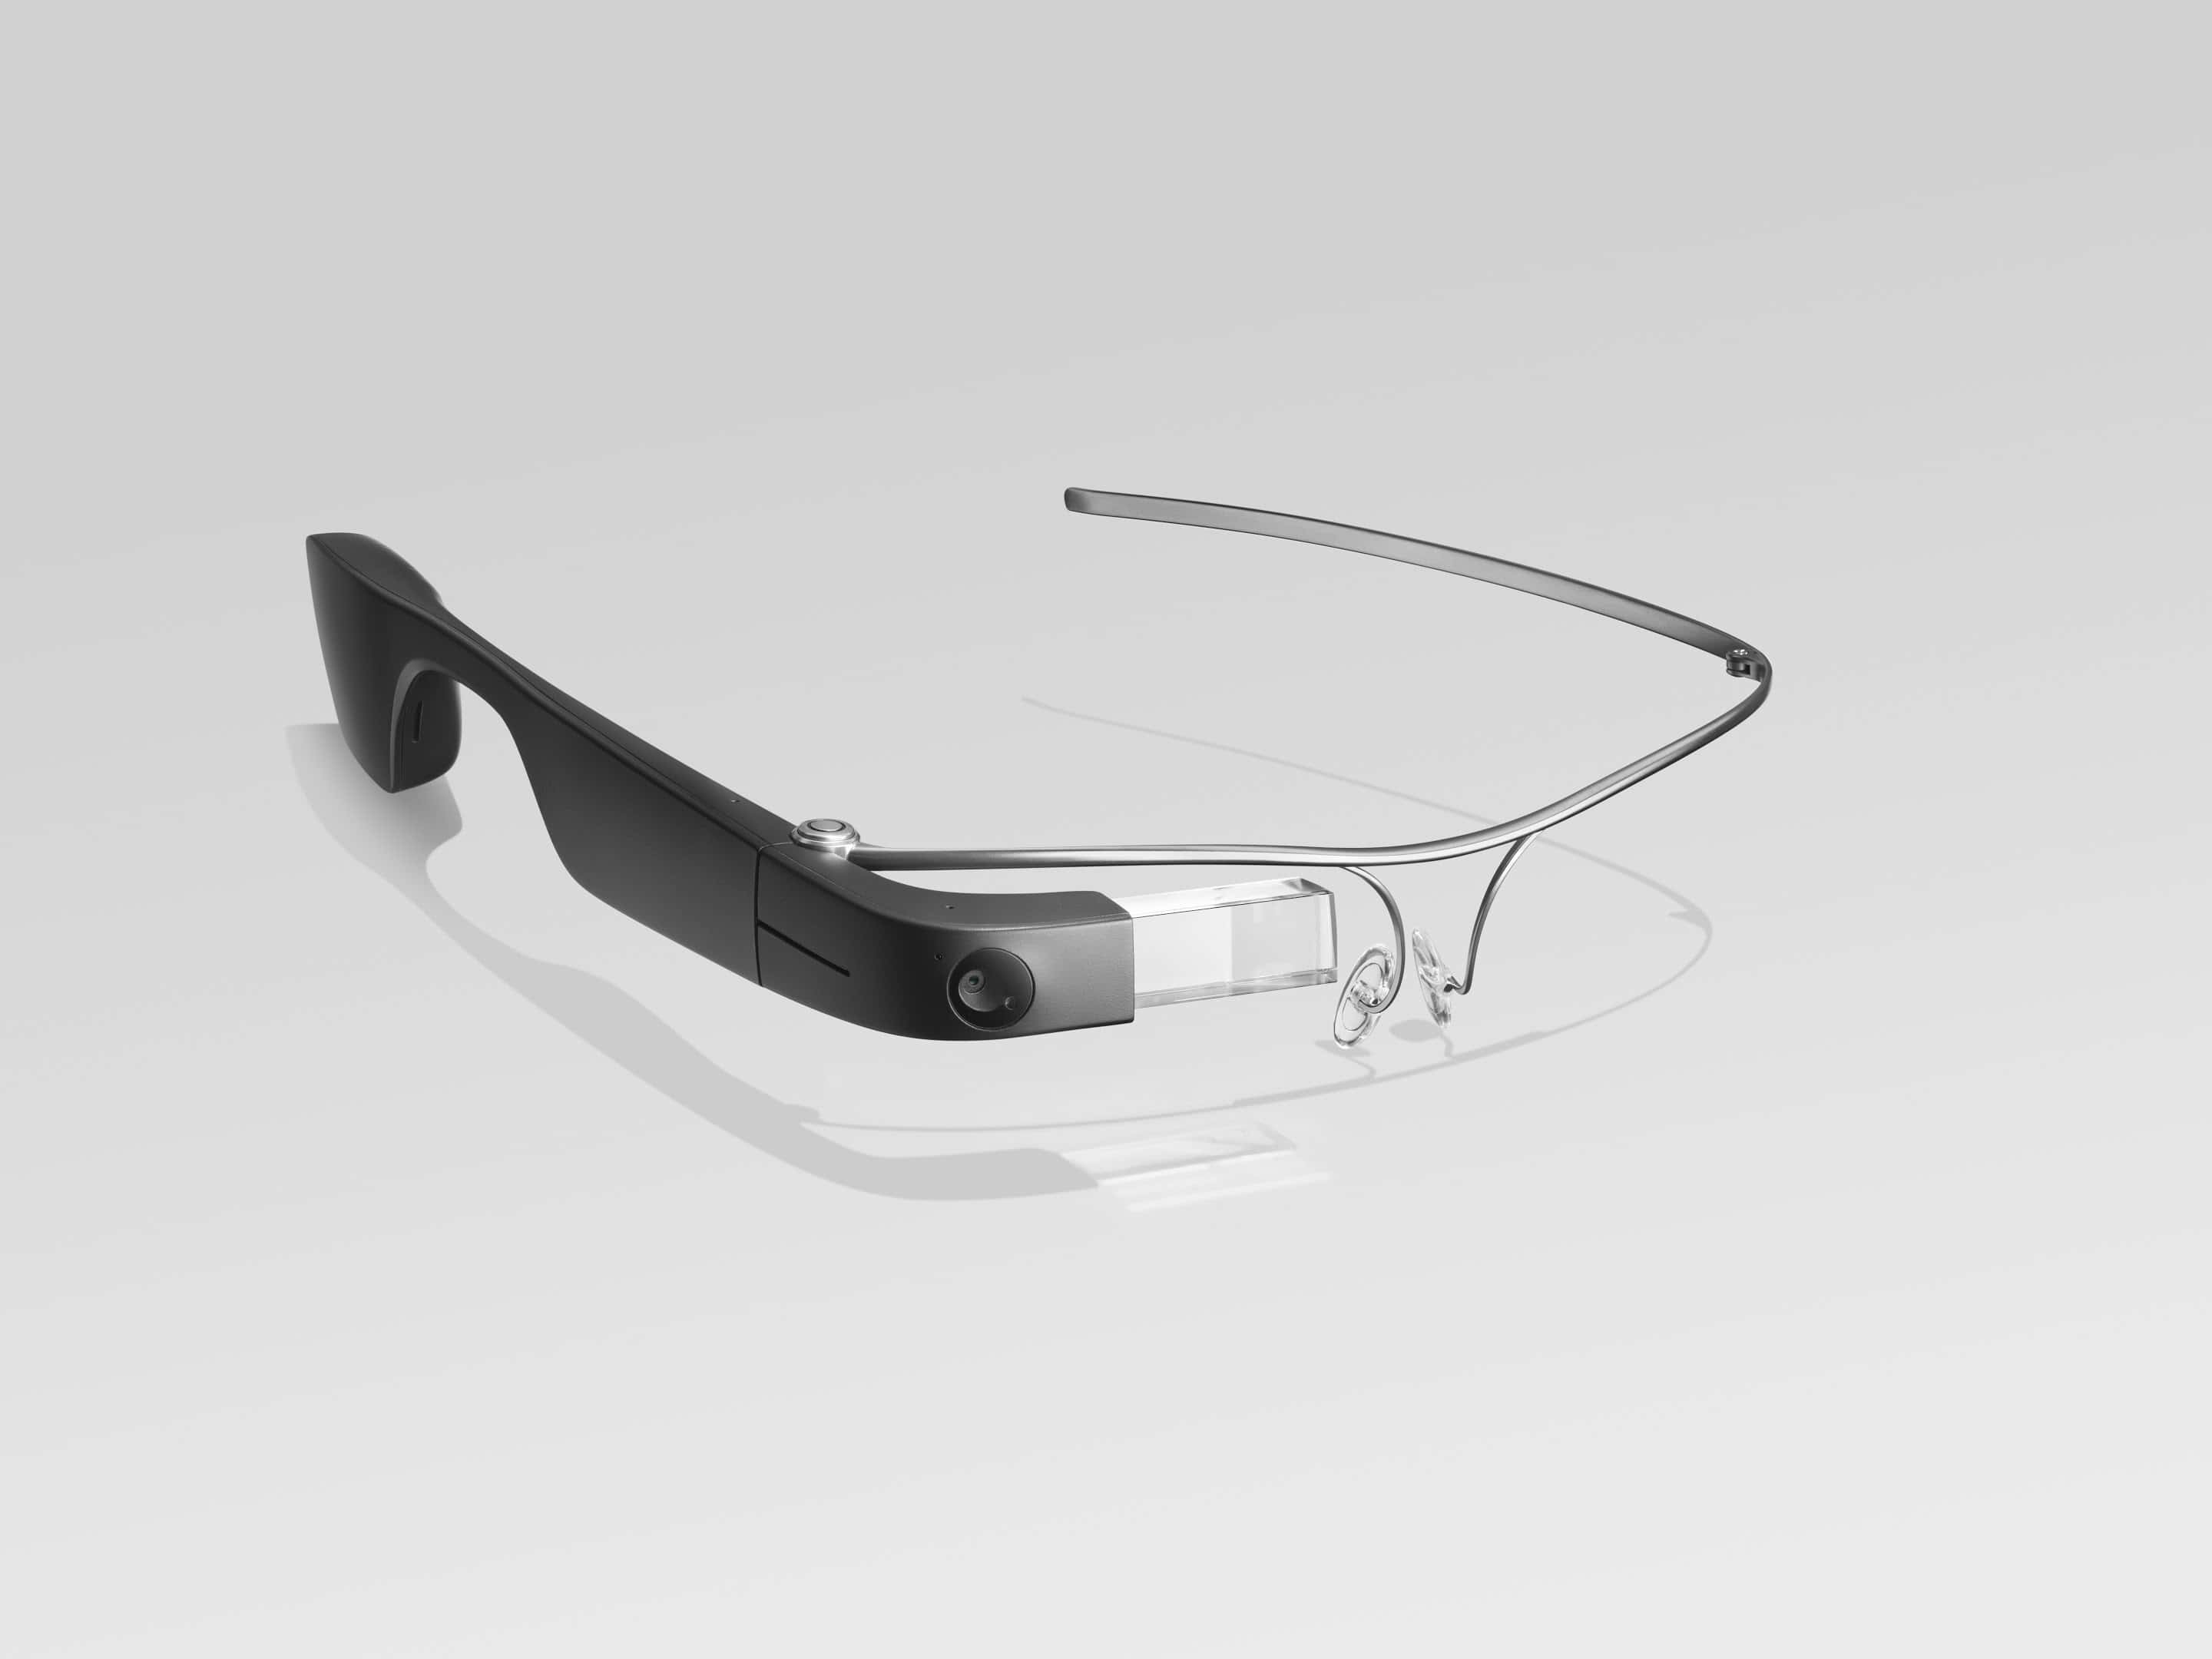 Photo of Envision Glasses with the standard titanium frames; the frames are very lightweight metal just a few millimetres wide